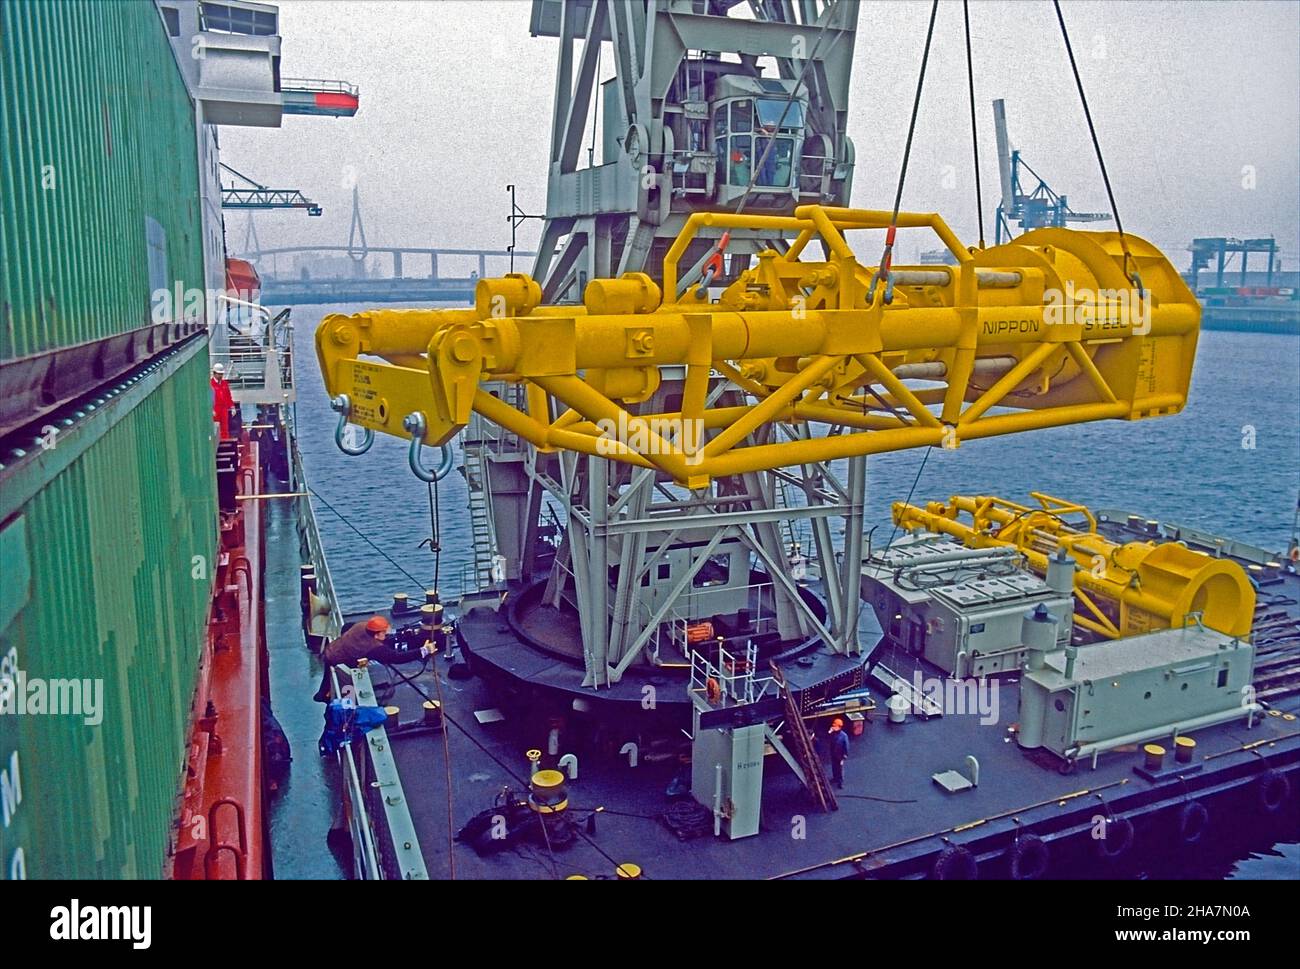 Heavy lift. Drilling rig component being loaded ontoa container vessel by a floating crane in the Port of Hambug, Germany. Stock Photo